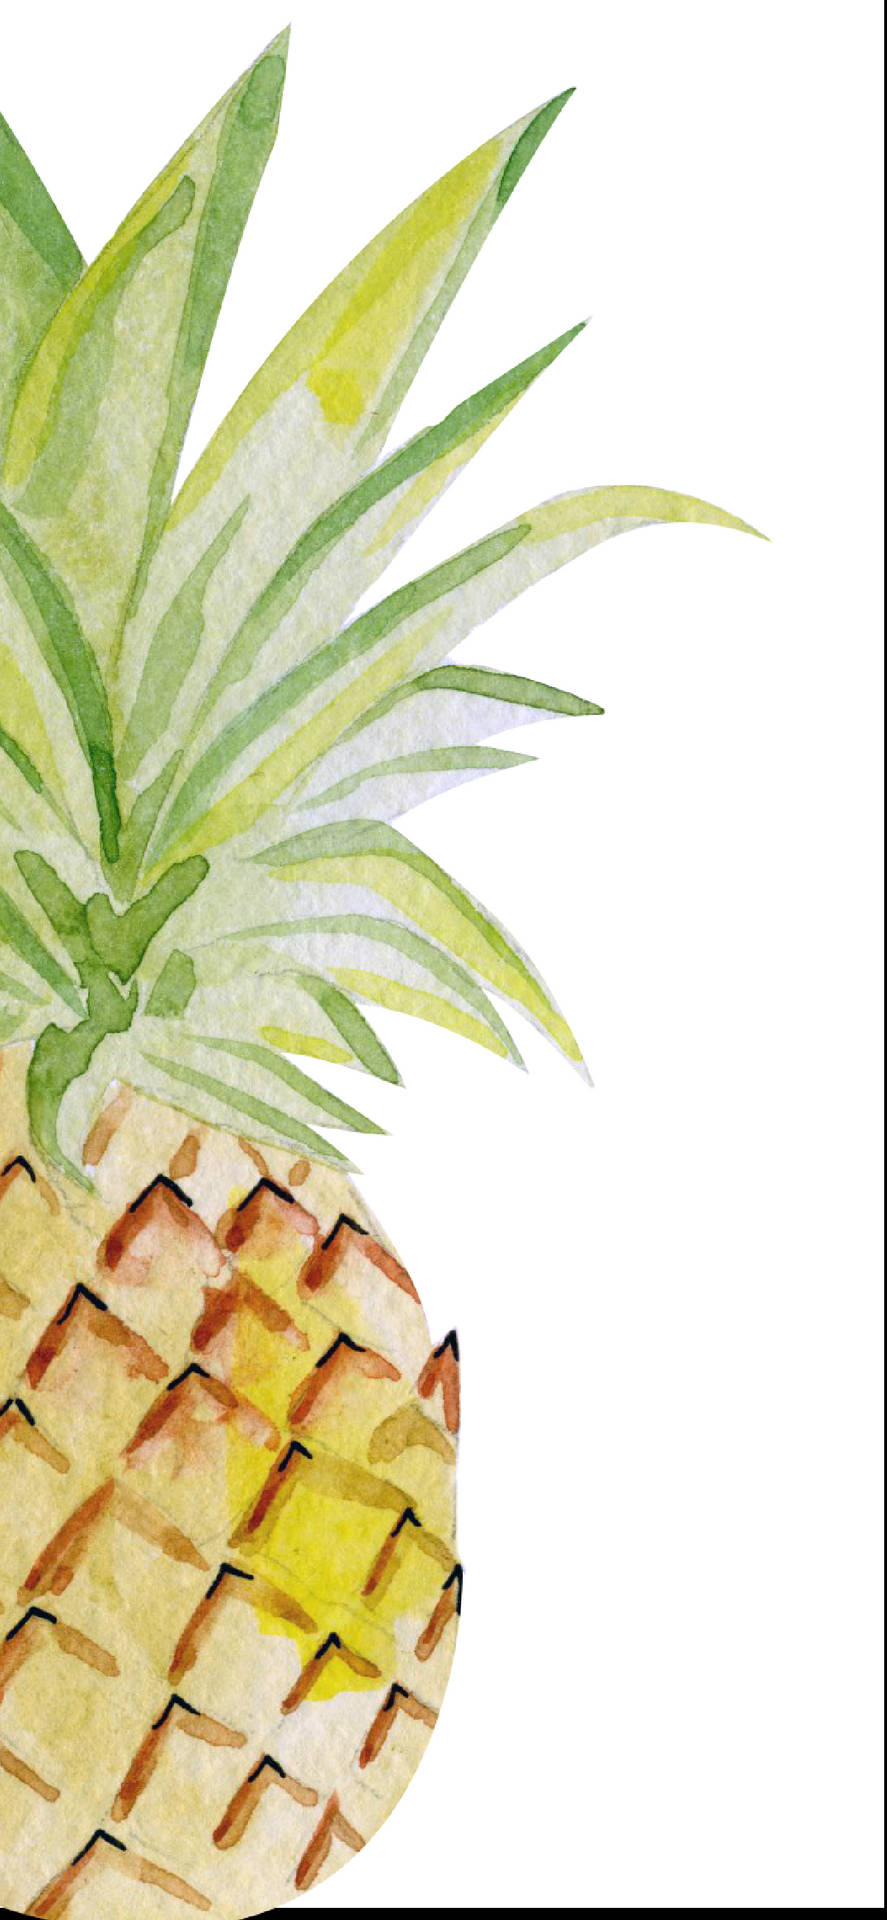 10 Colorful Pineapple Wallpapers for your iPhone  Mac  Pineapplesinfo